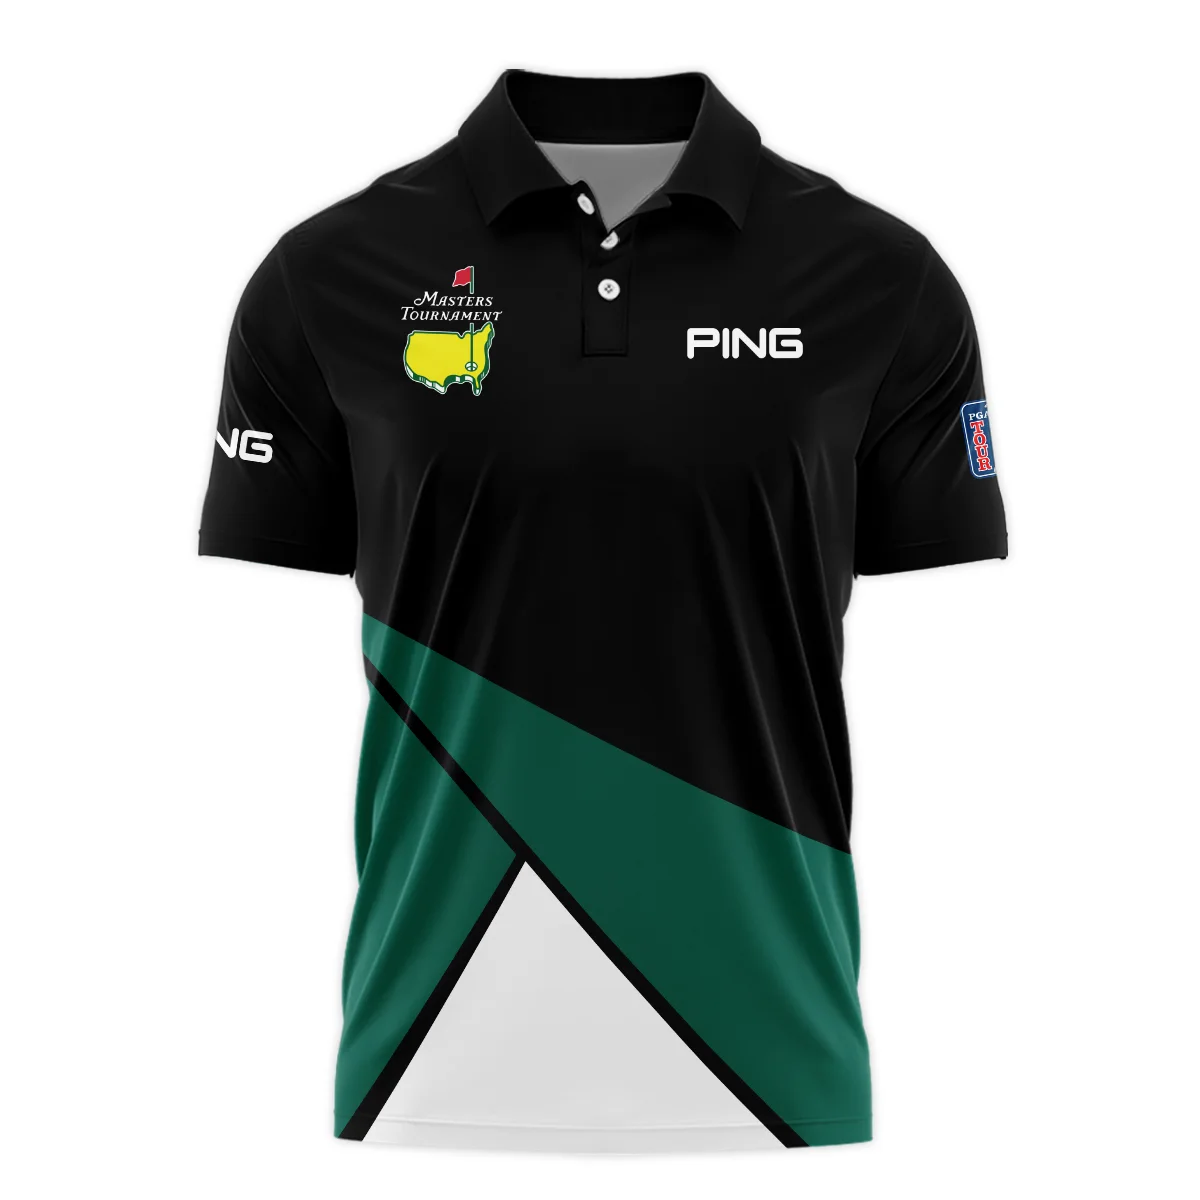 Golf Masters Tournament Ping Sleeveless Jacket Black And Green Golf Sports All Over Print Sleeveless Jacket